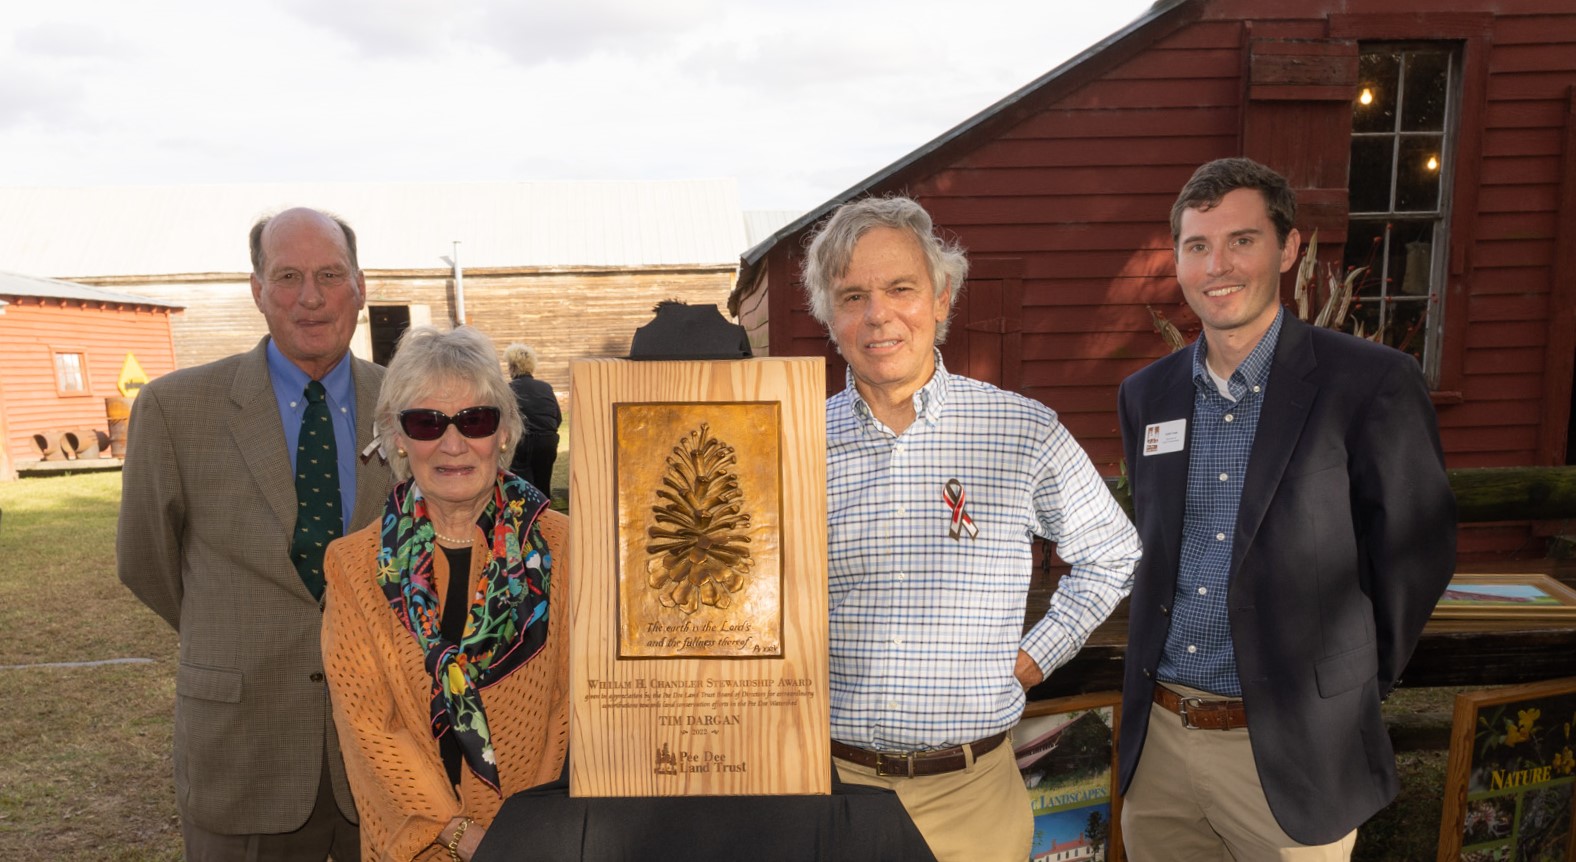 Pictured Left to Right:  Keith Williamson (PDLT Immediate Past Chairman), Ann Rodgers Chandler, Tim Dargan (Award Recipient), Seth Cook (PDLT Director of Land Protection)